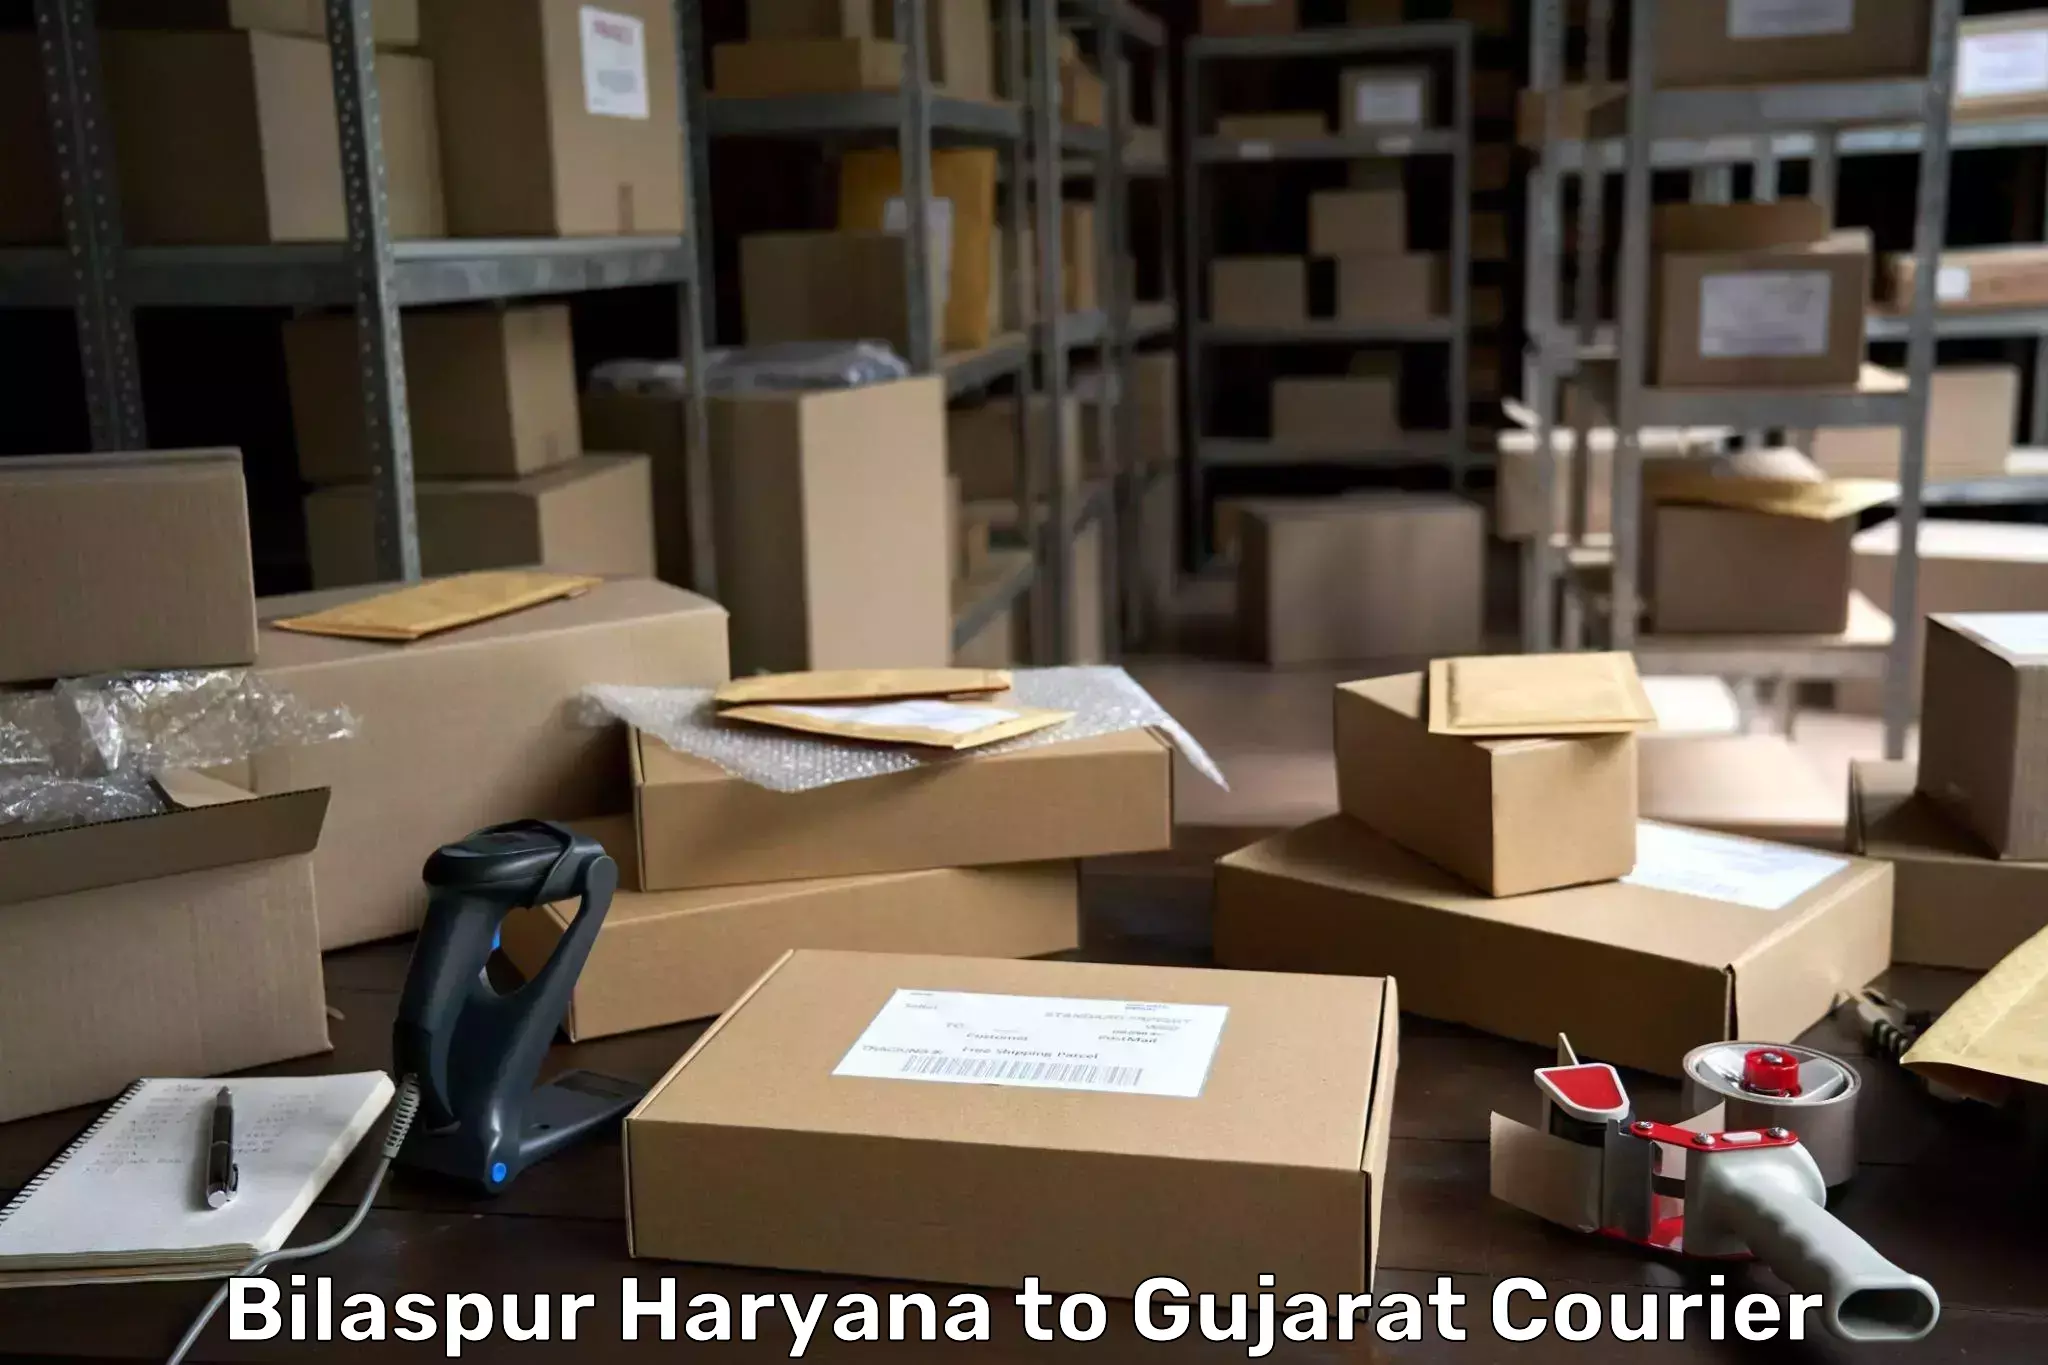 Courier service booking Bilaspur Haryana to Botad